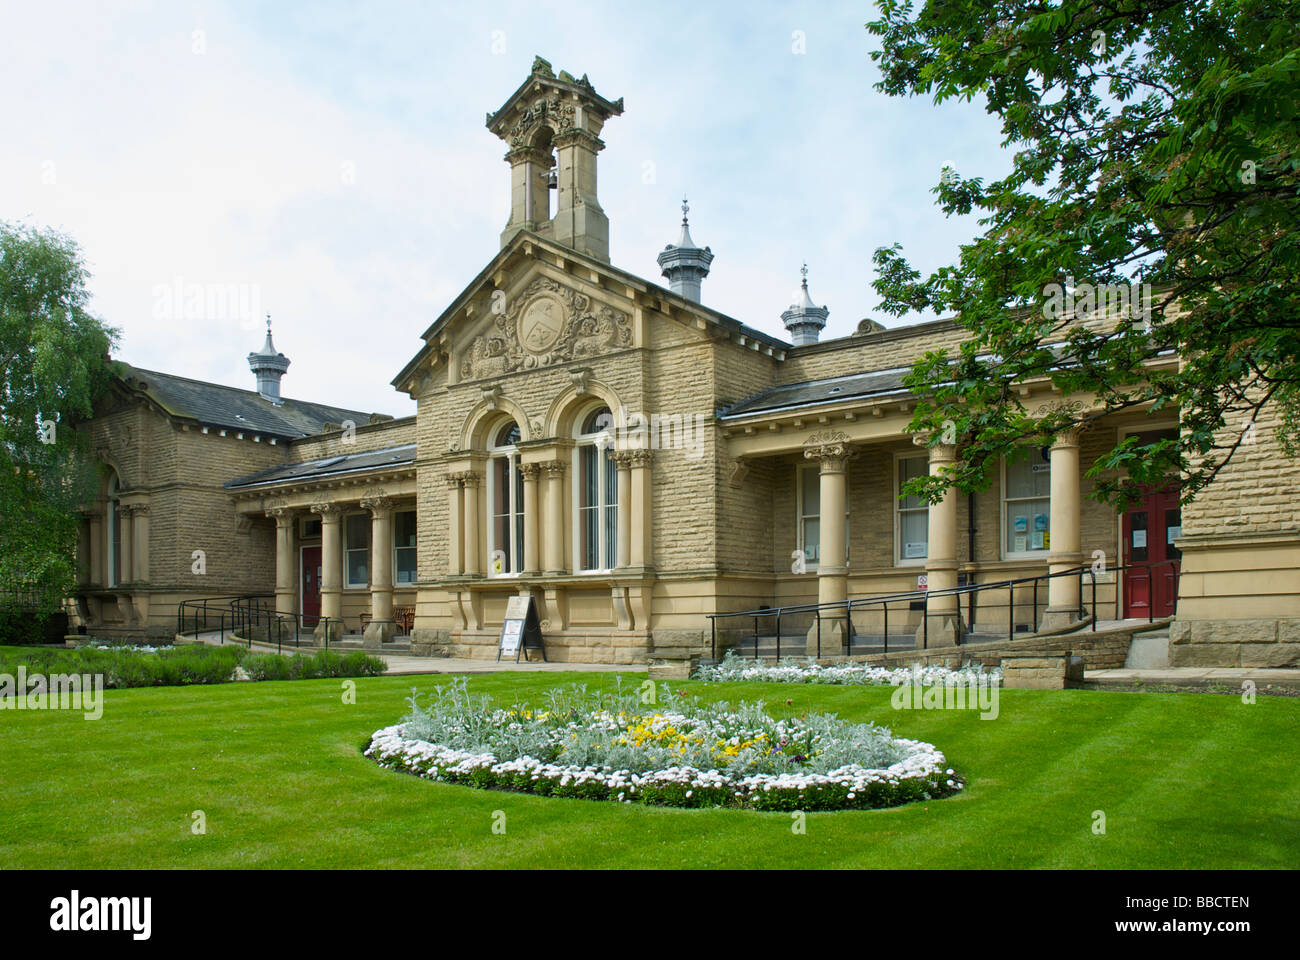 The School, Victoria Road, Saltaire, West Yorkshire, England UK Stock Photo